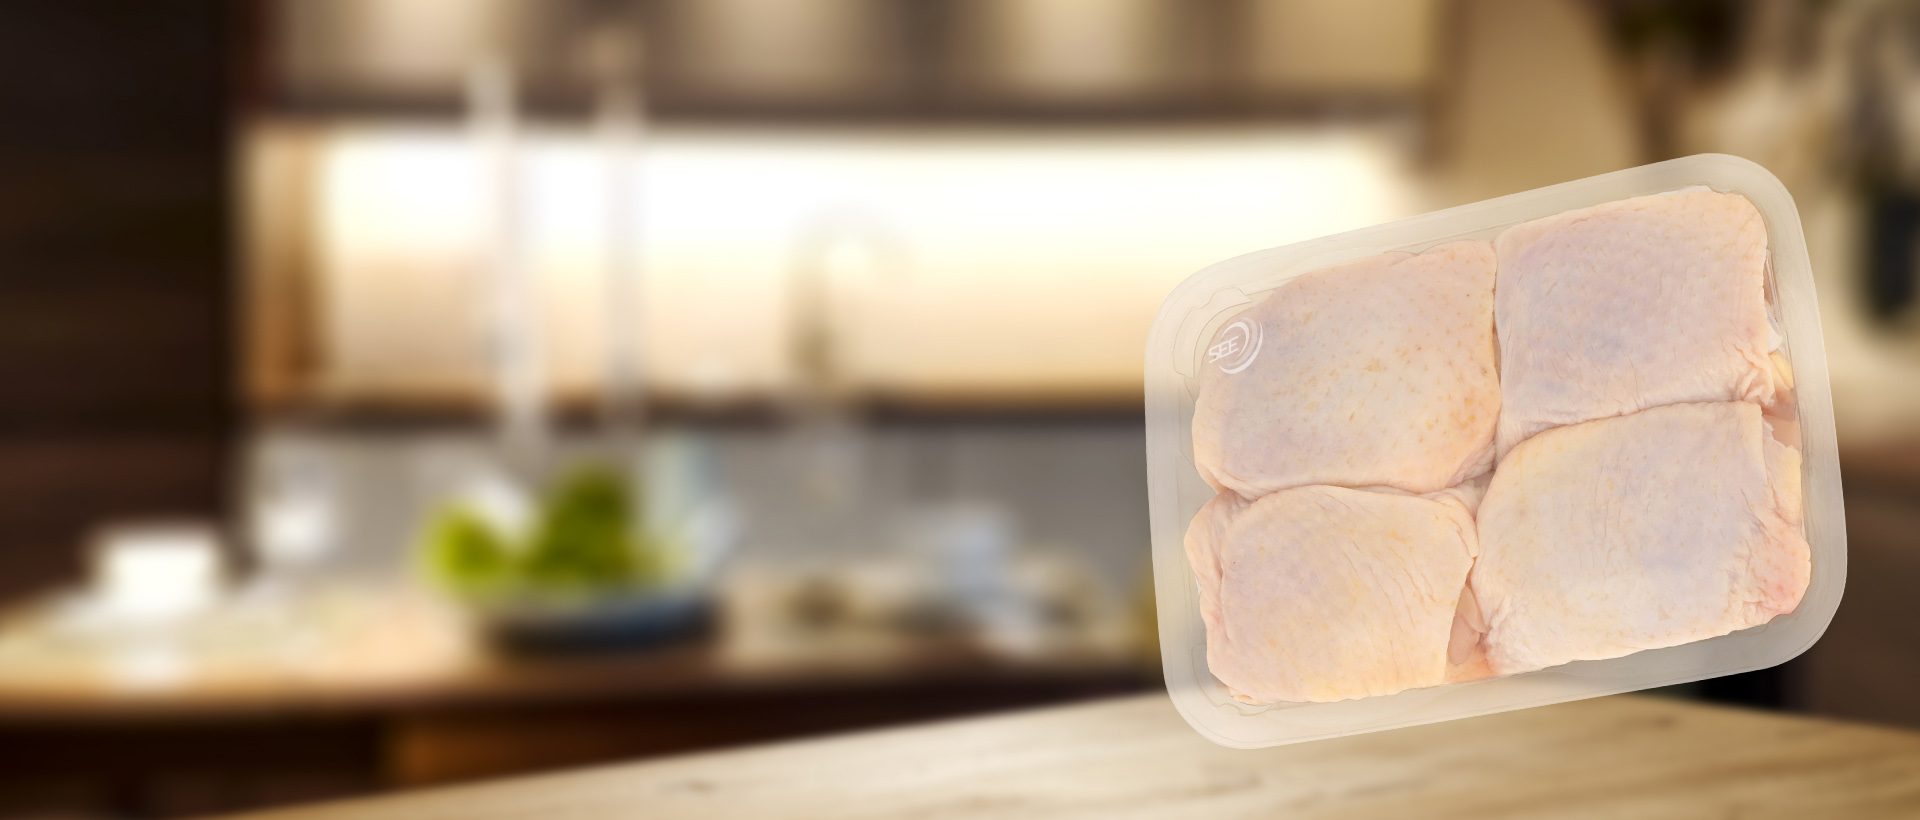 CRYOVAC brand SES overwrap film over chicken thighs in clear tray